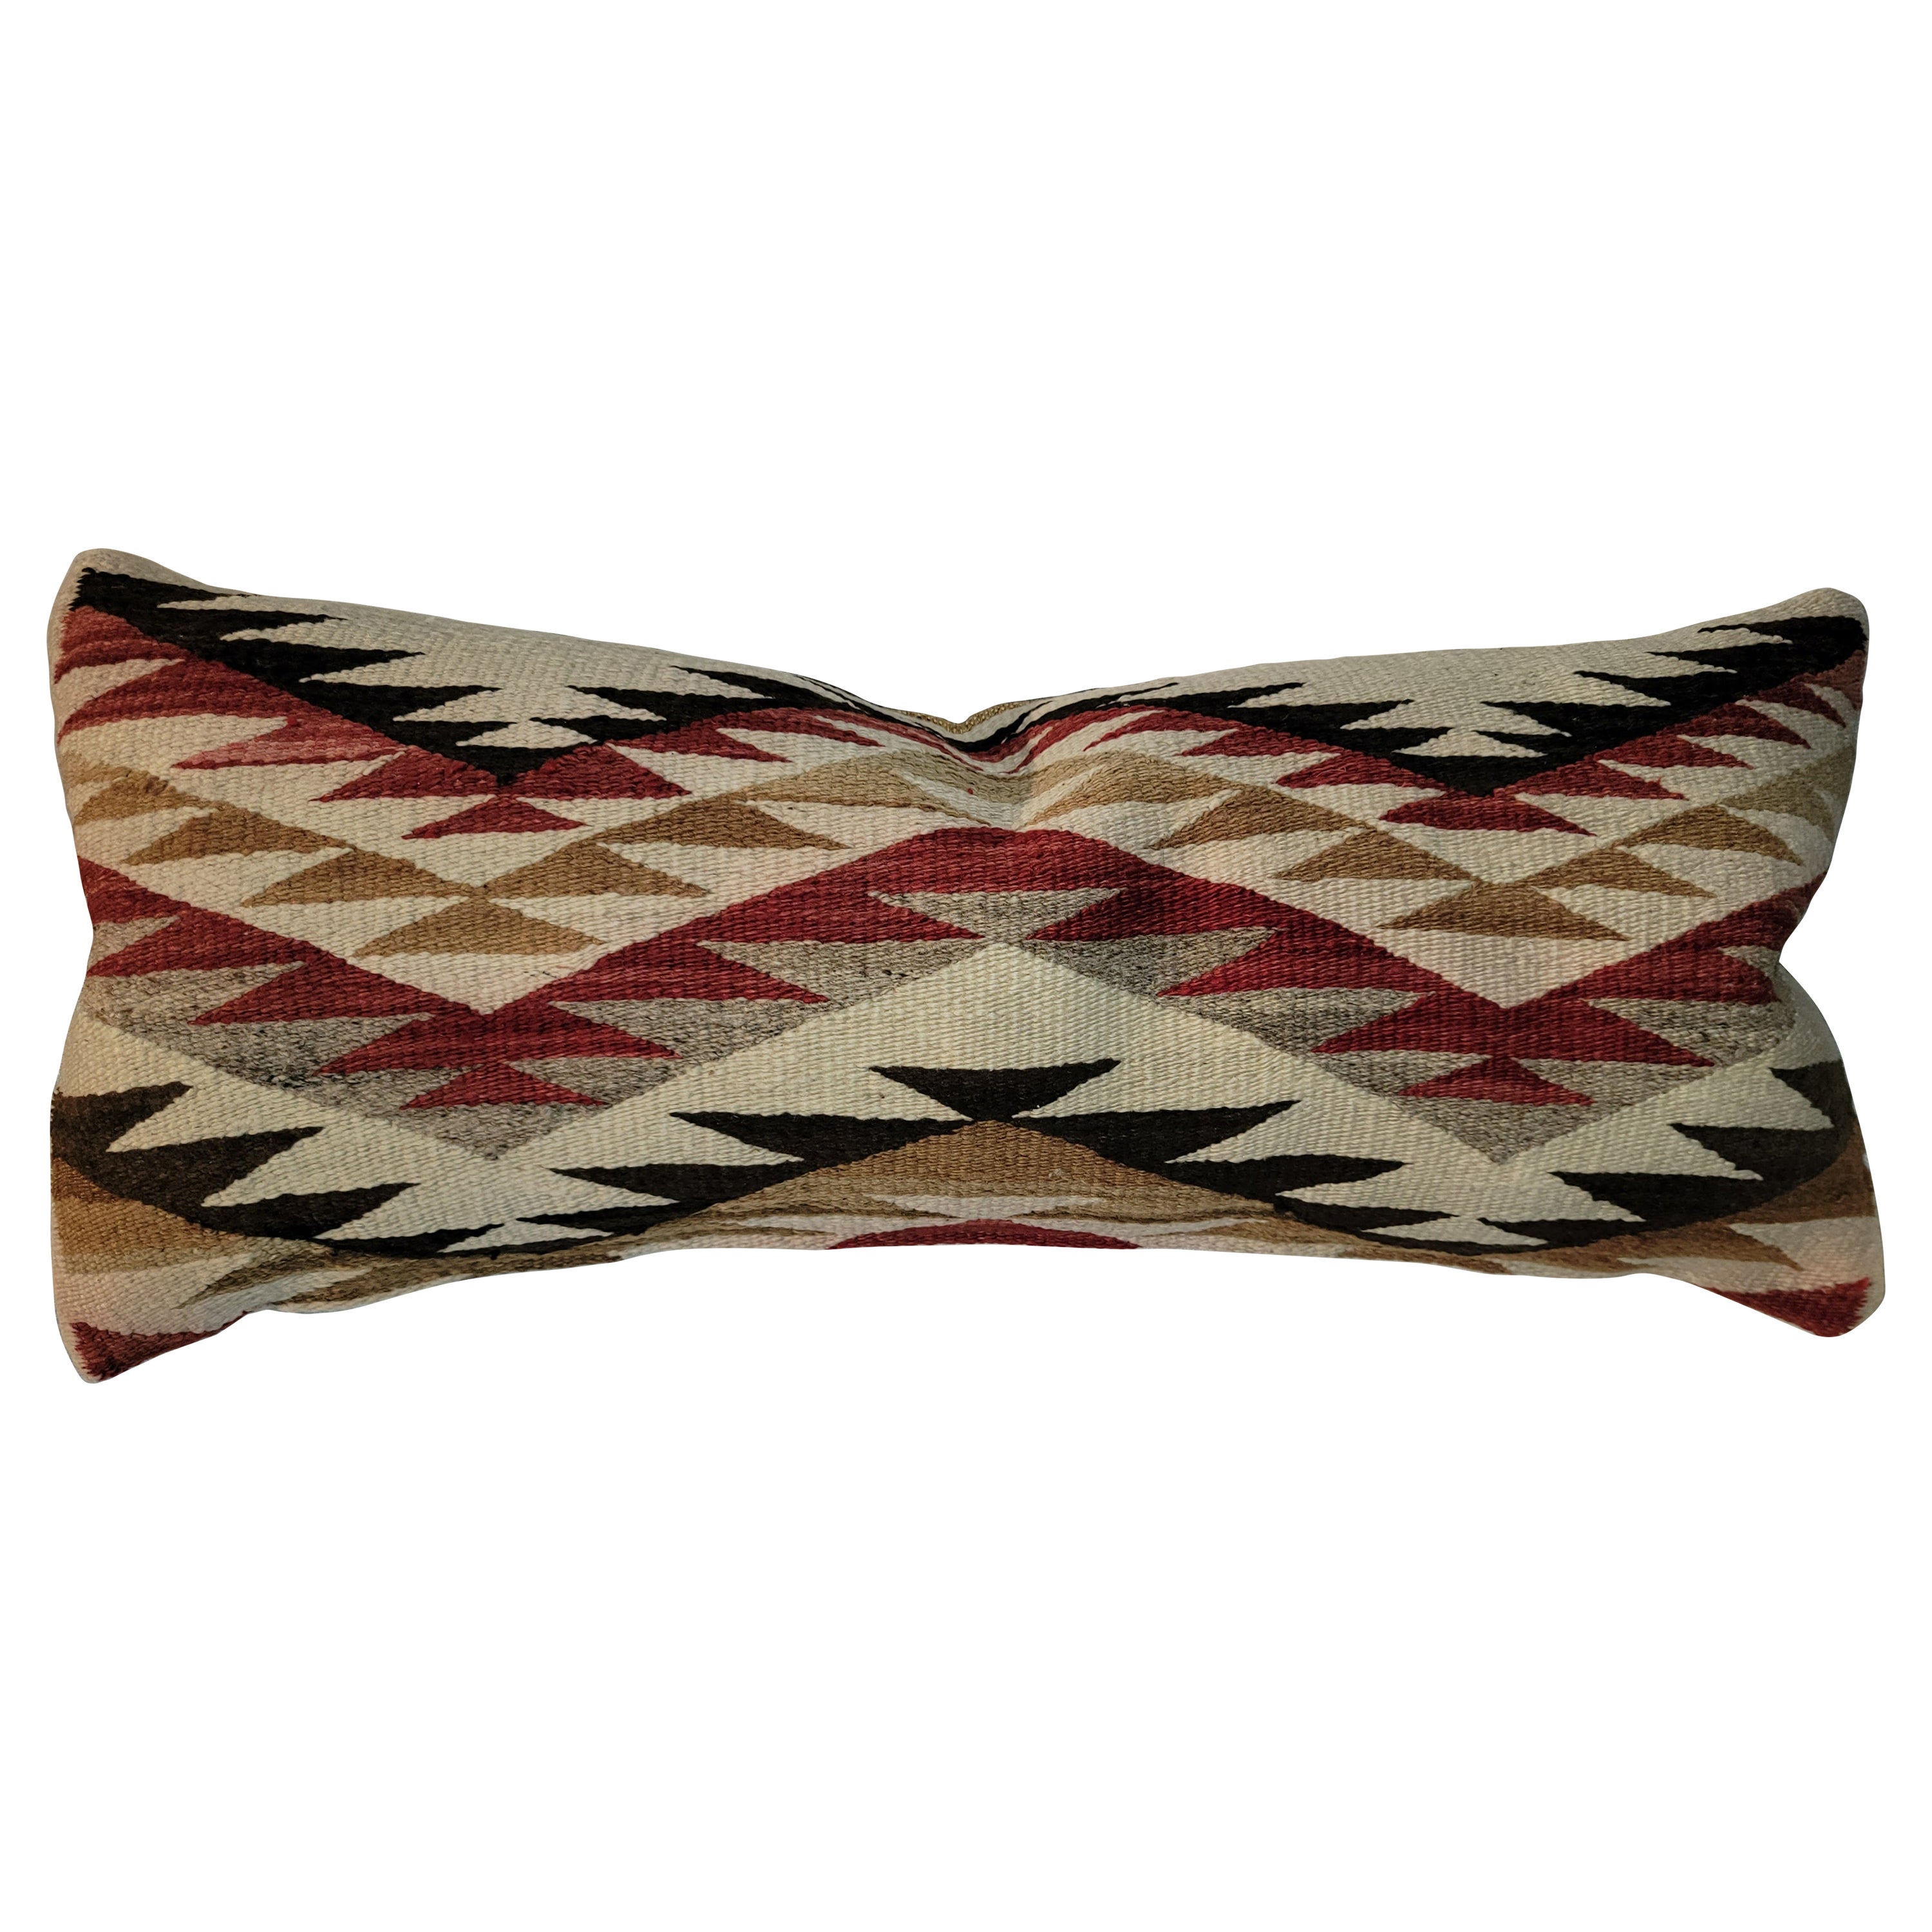 Early 20thc Navajo Indian Weaving -Eye Dazzler Pillow For Sale